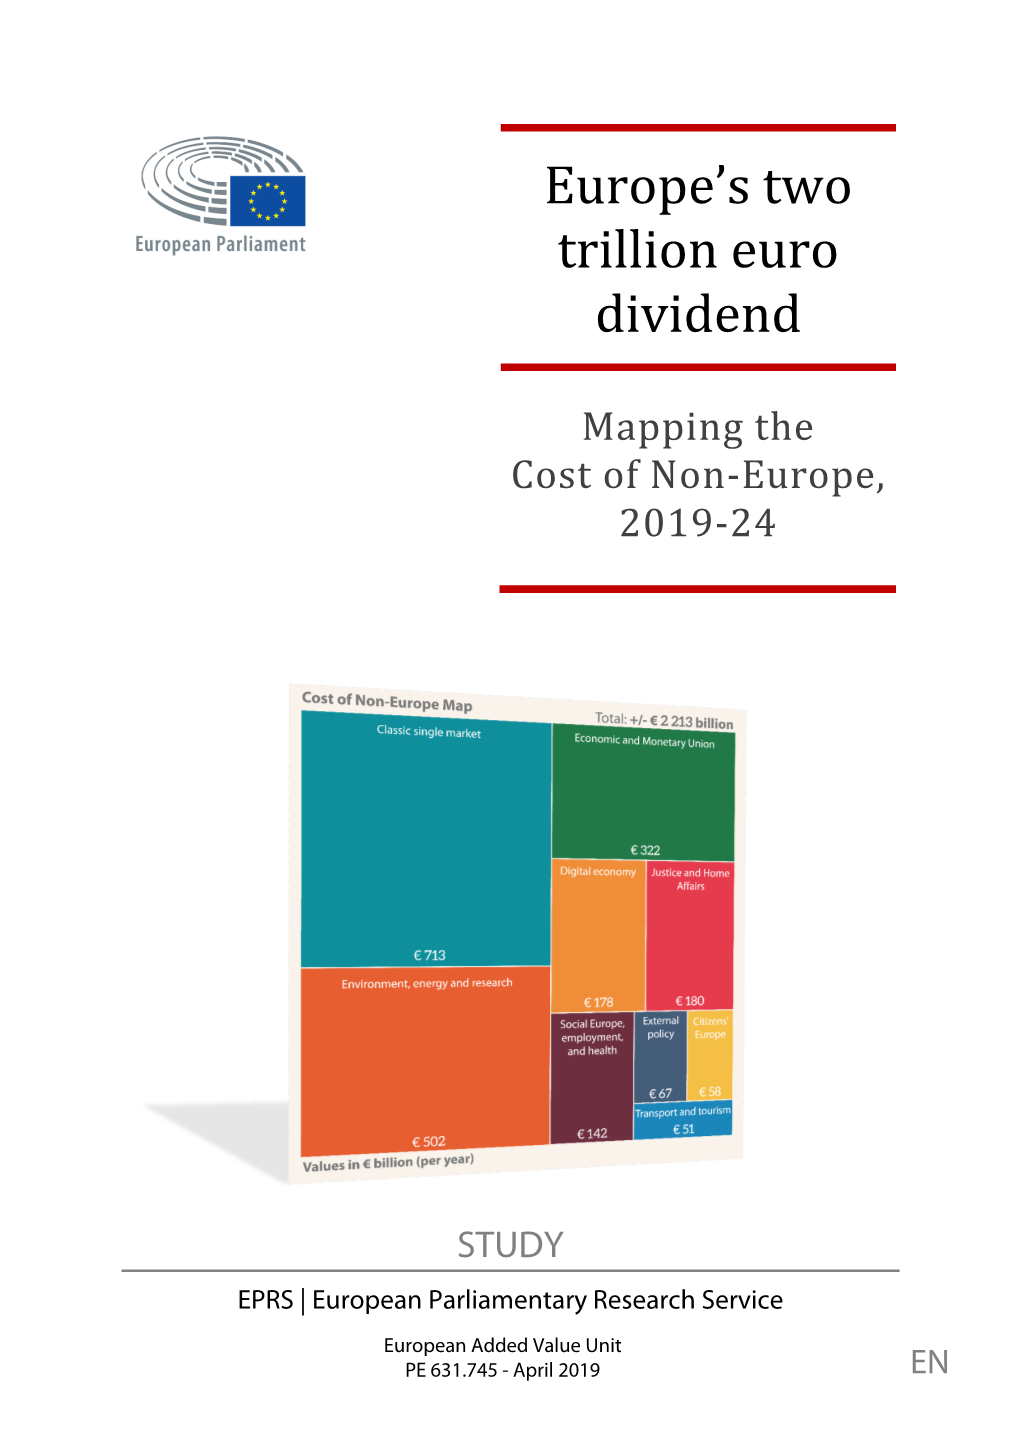 Europe's Two Trillion Euro Dividend: Mapping the Cost of Non-Europe, 2019-24